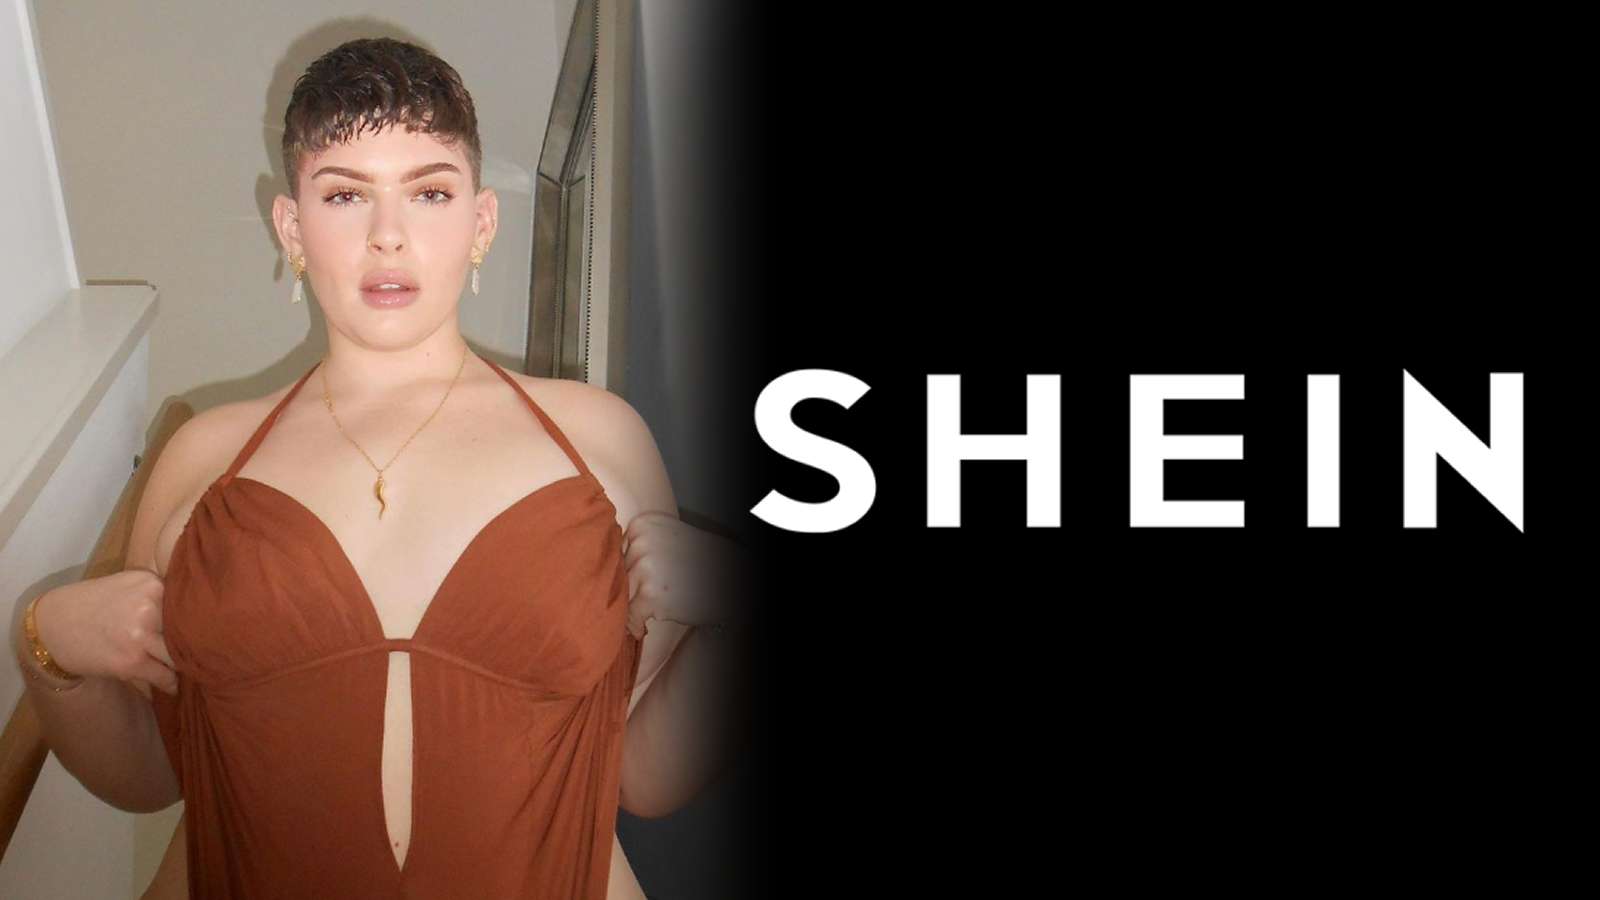 Influencers attend tone deaf factory tour of Shein amidst backlash